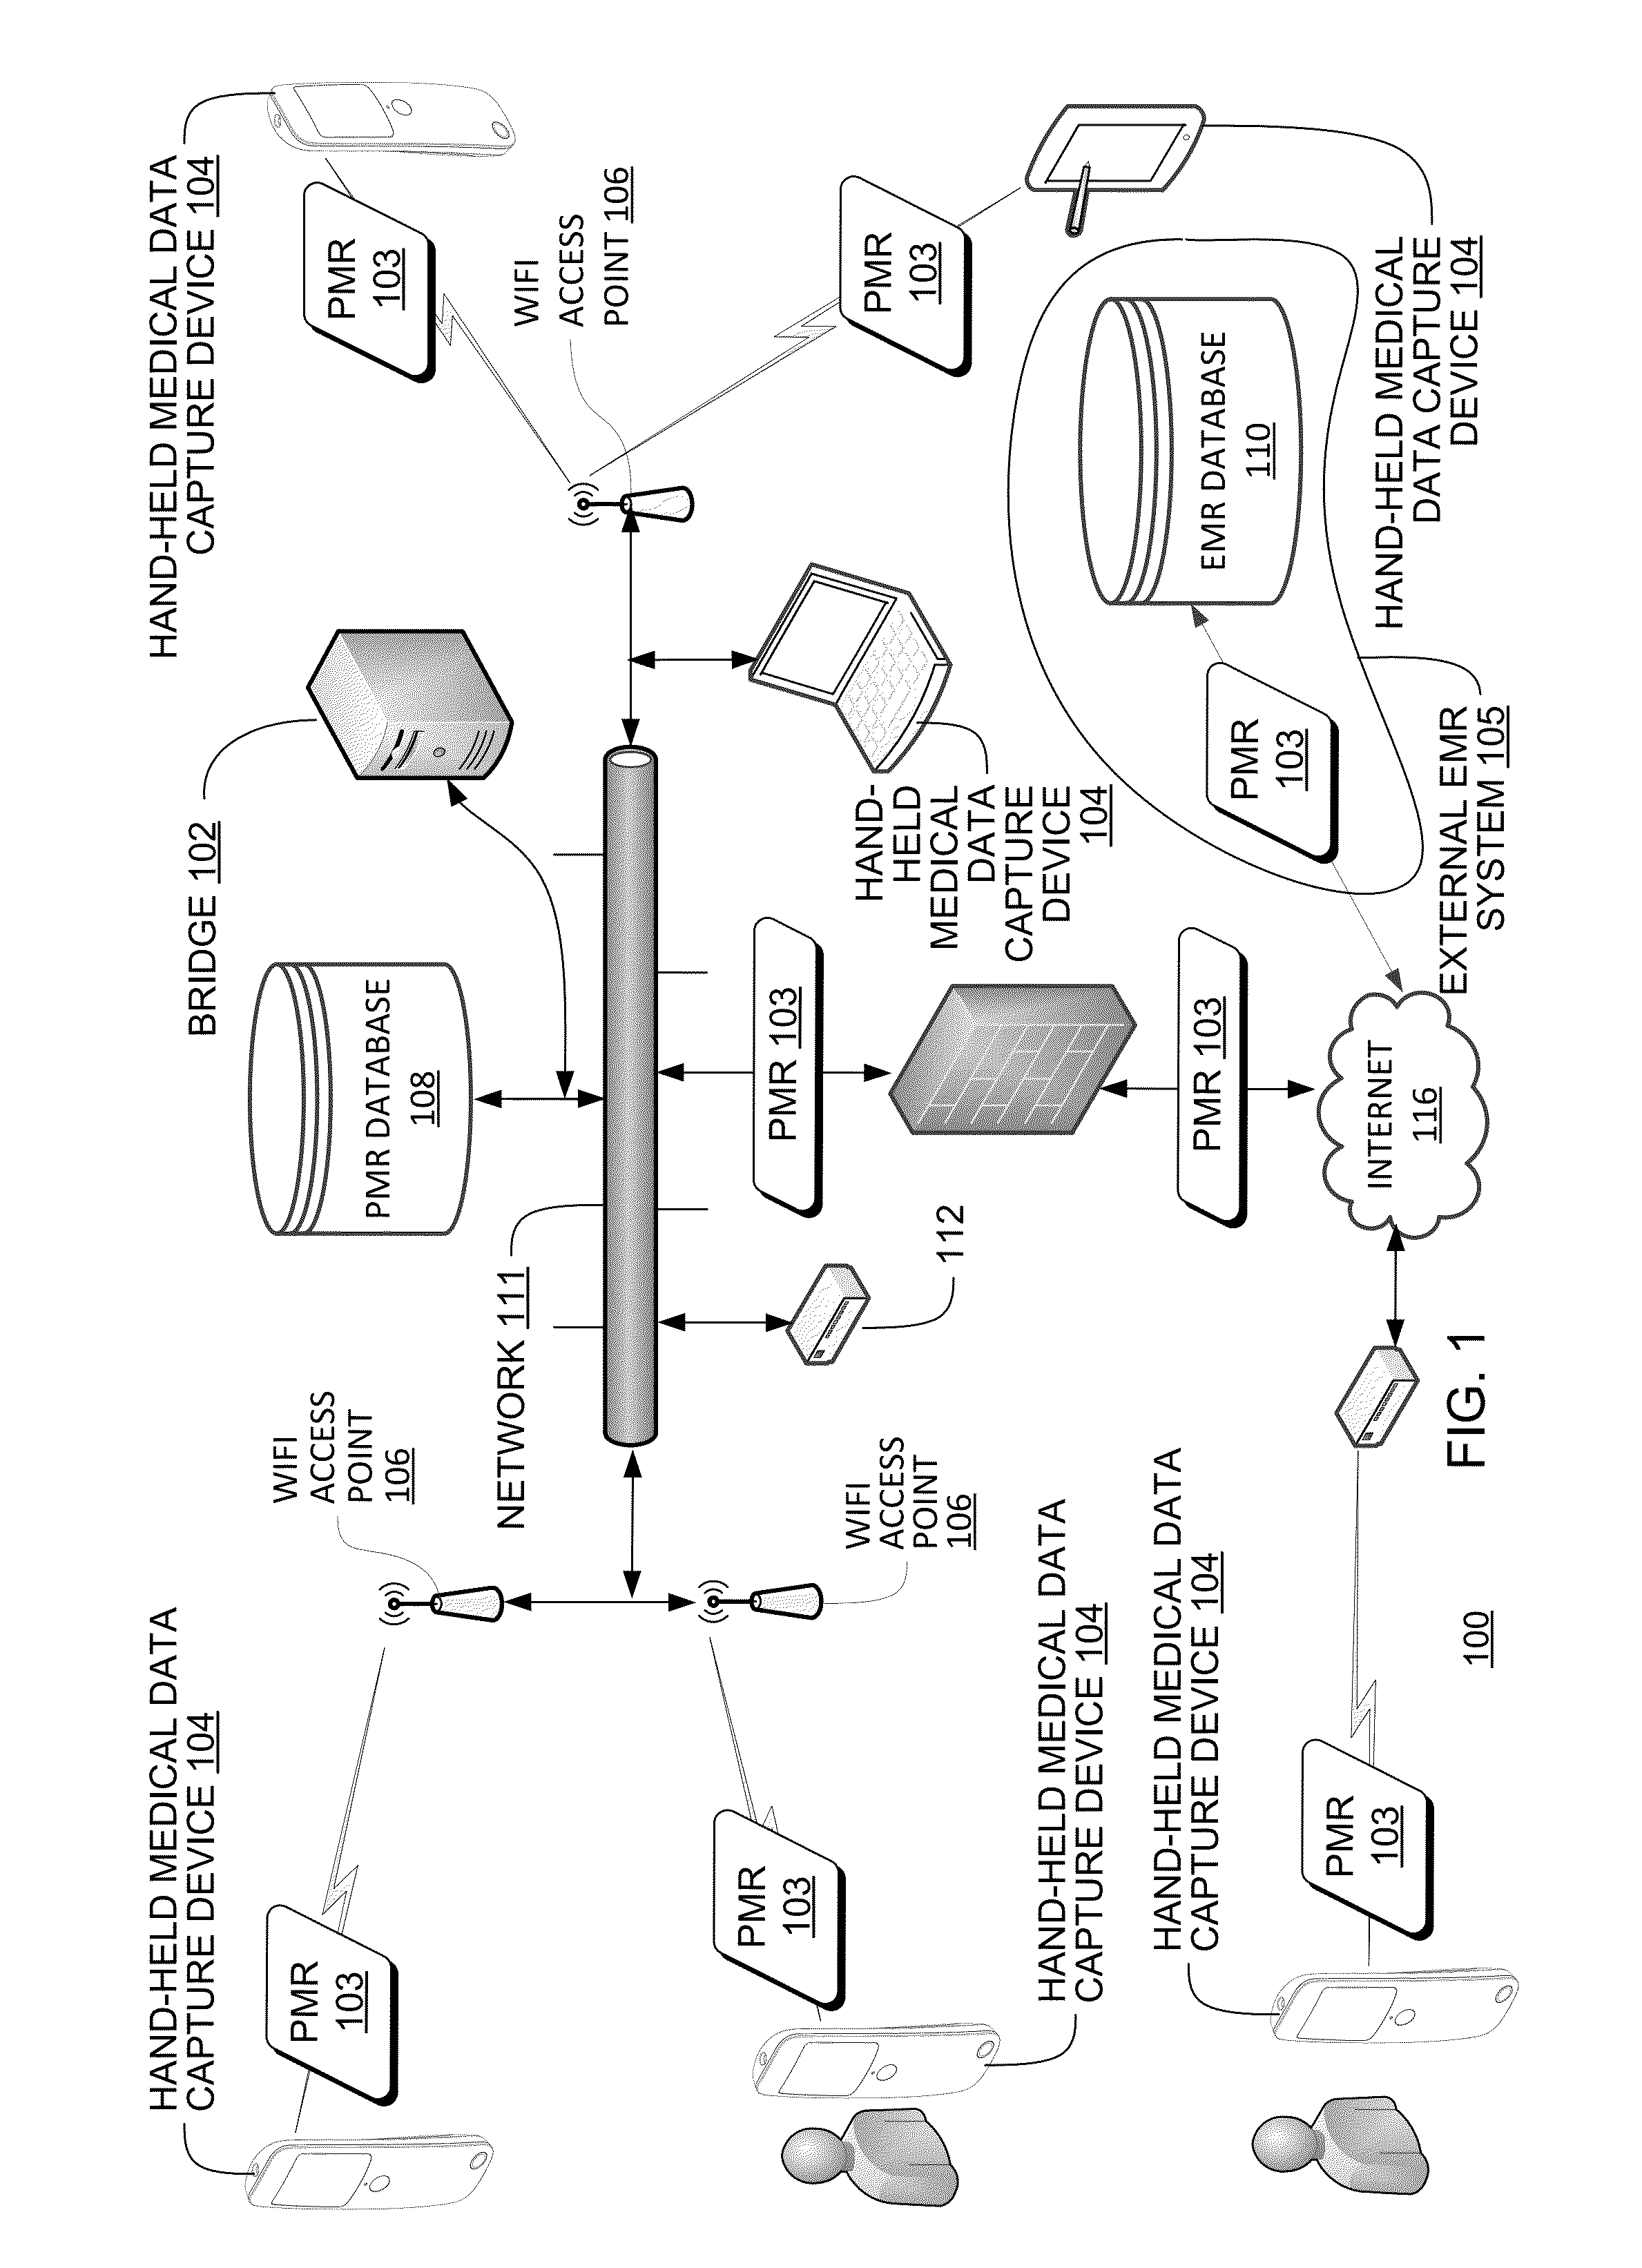 Hand-held medical-data capture-device interoperation with electronic medical record systems